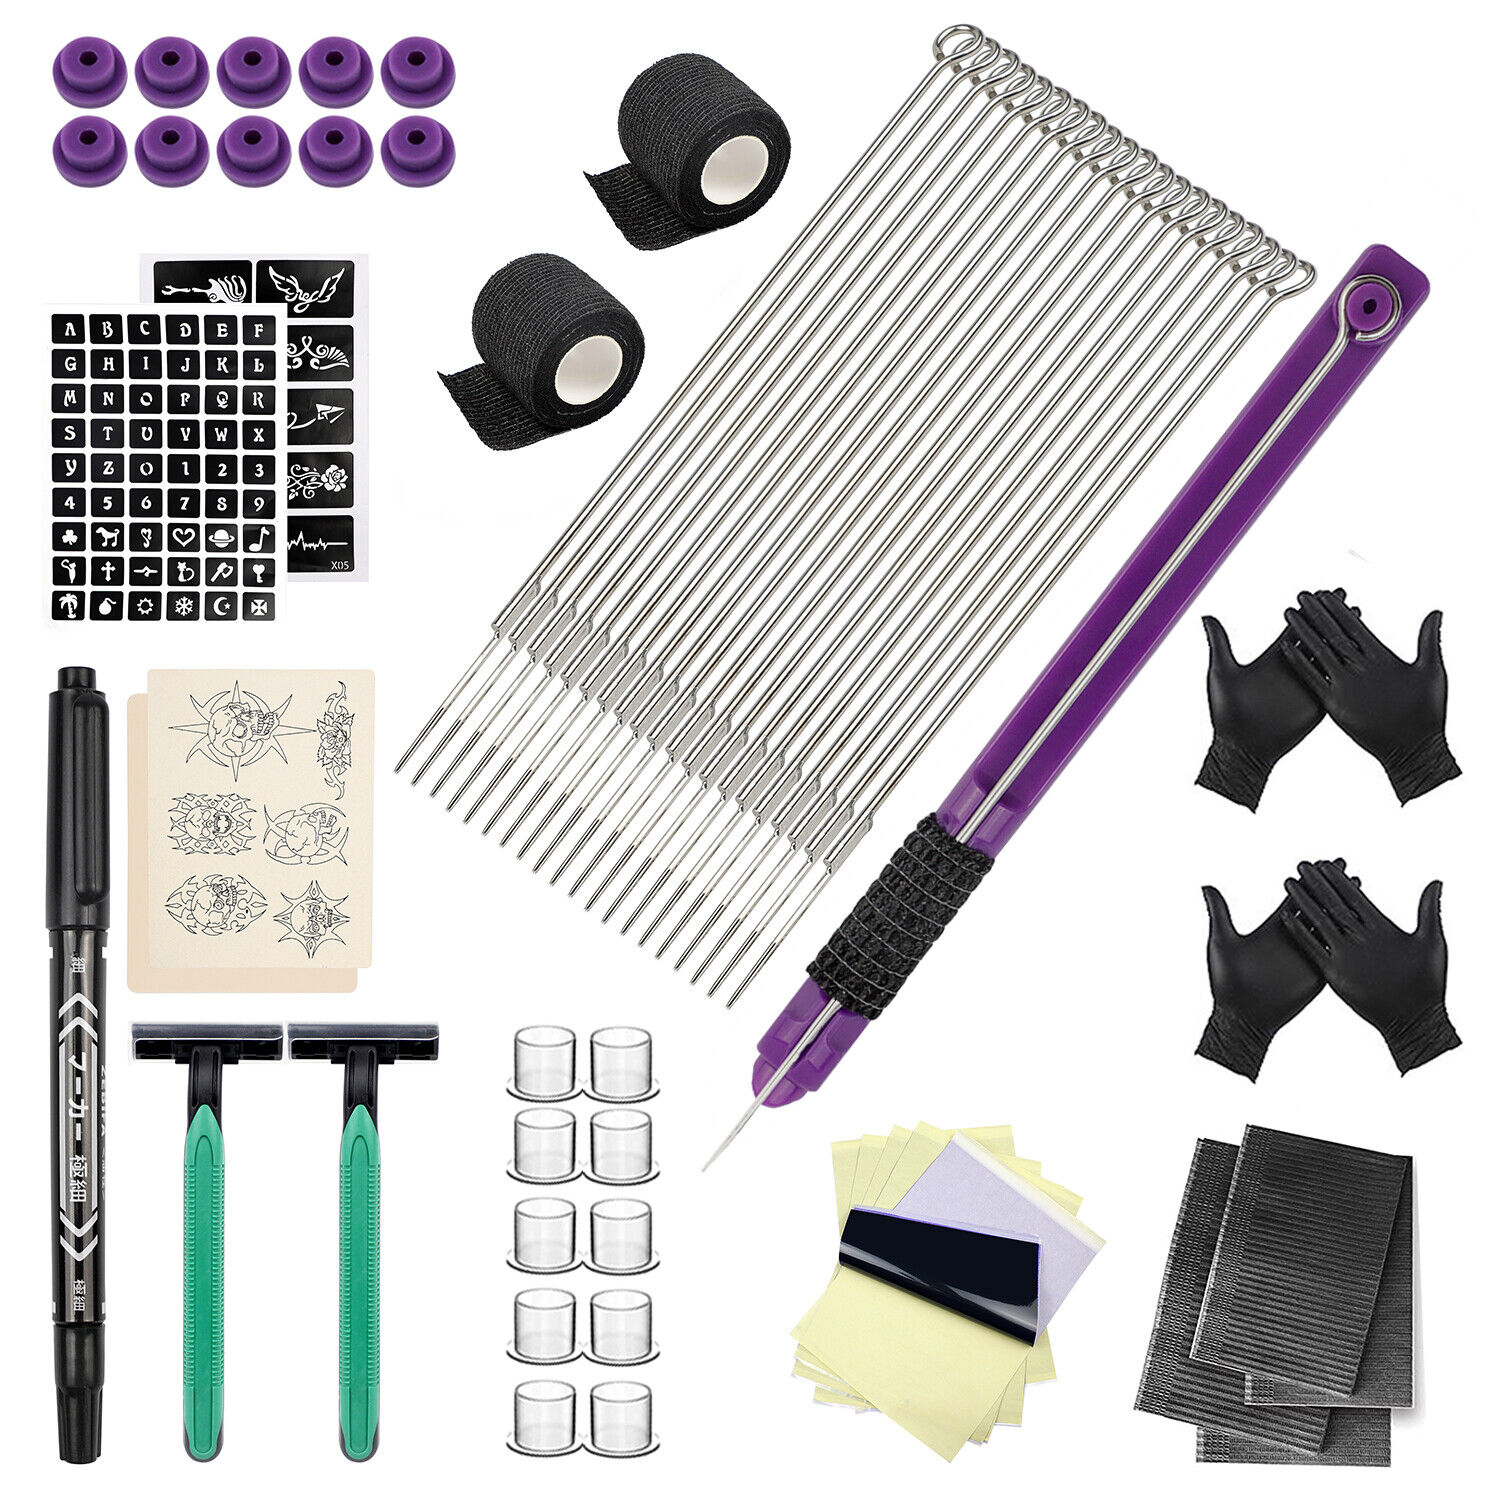 Hand Poke and Stick Tattoo Complete Kit DIY Tattoo Supply Gloves Needles